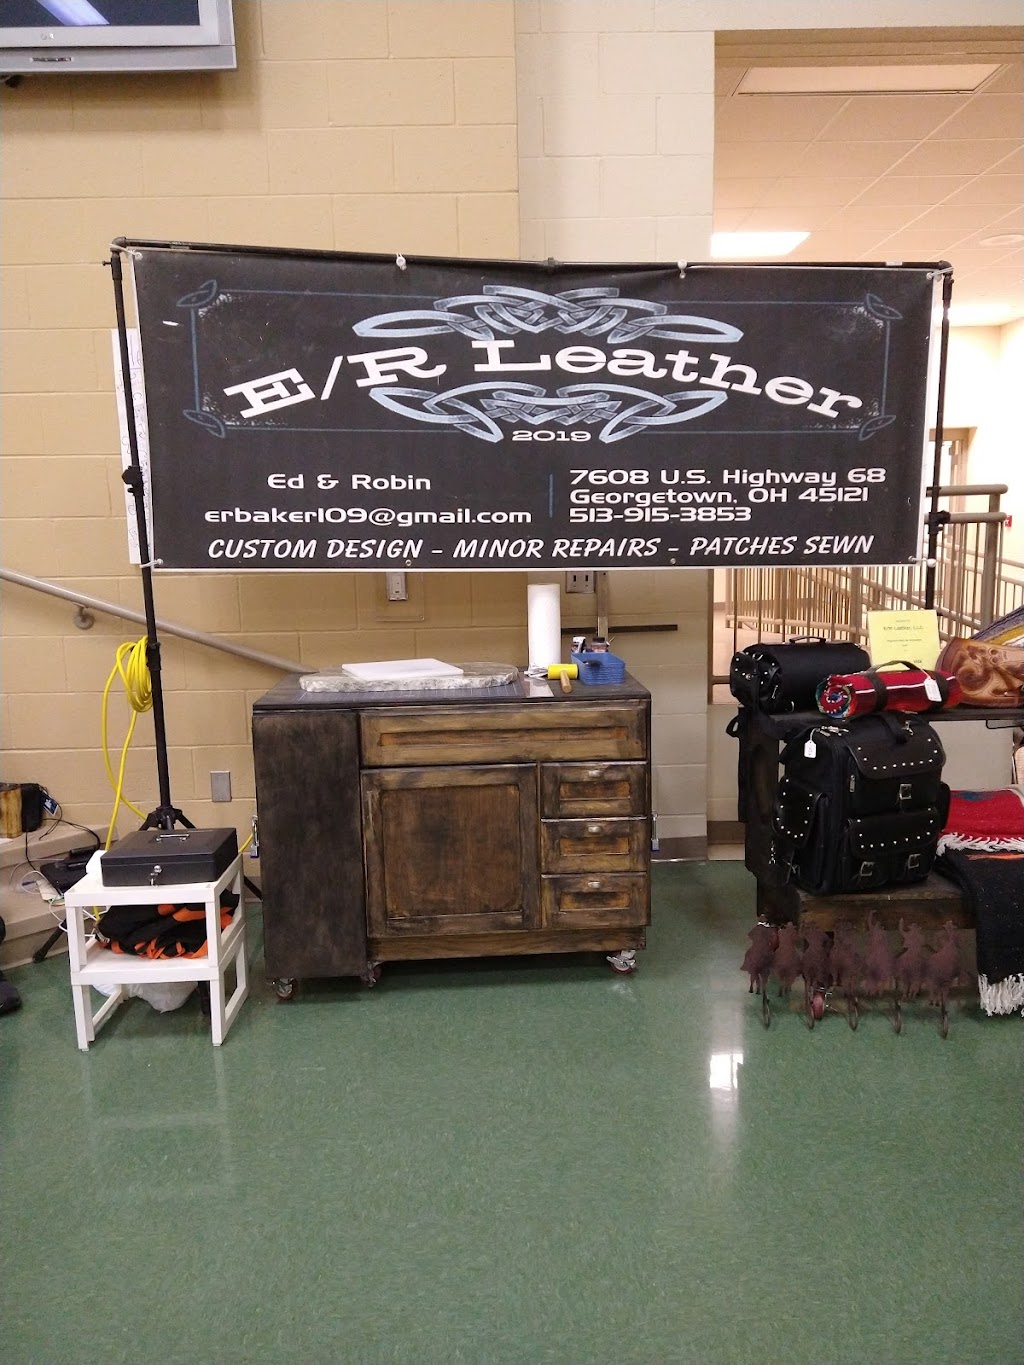 E/R Leather, LLC | 7608 US-68, Georgetown, OH 45121 | Phone: (513) 915-3853